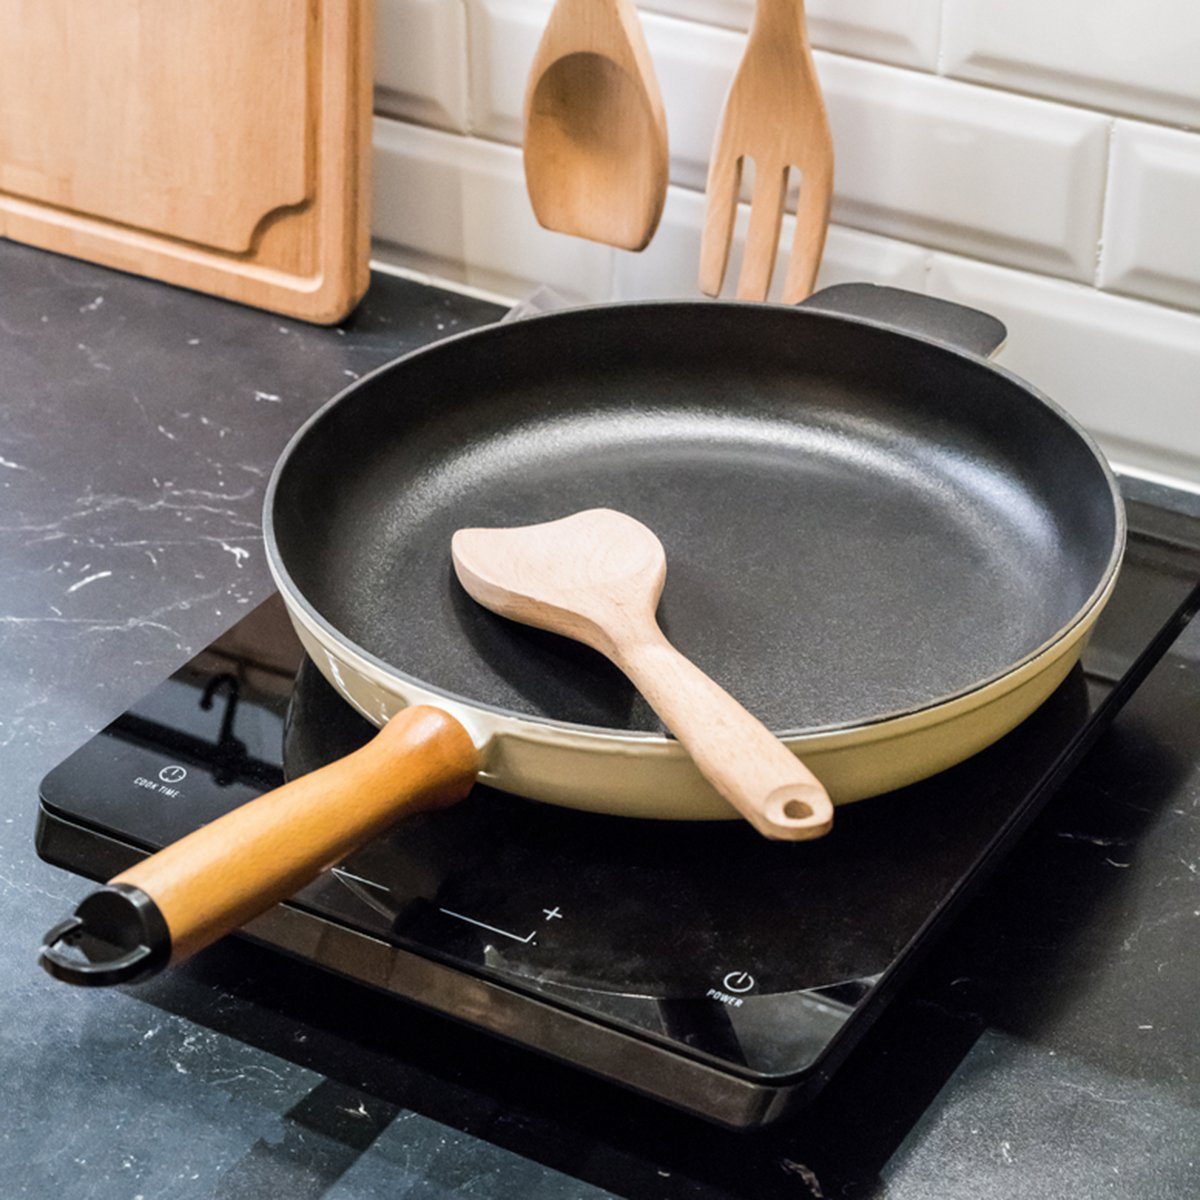 Spatula in skillet teflon coating pan on electric stove against spoon and fork hanging on white brick wall in small kitchen